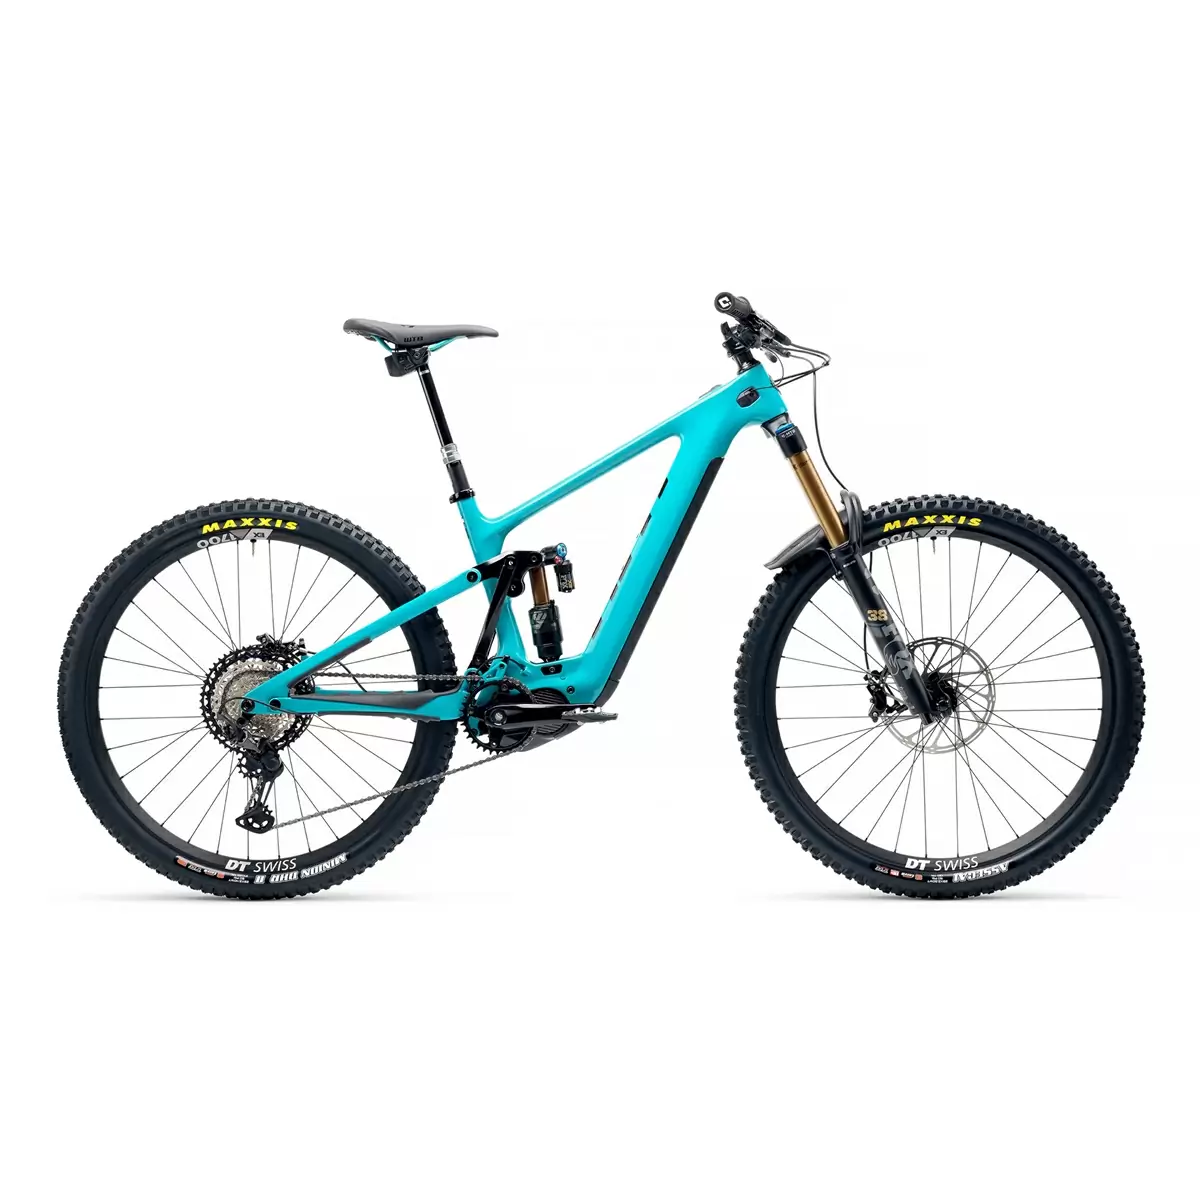 160E T1 29'' 170mm 12s 630Wh Shimano EP8 Turquoise Size S - image